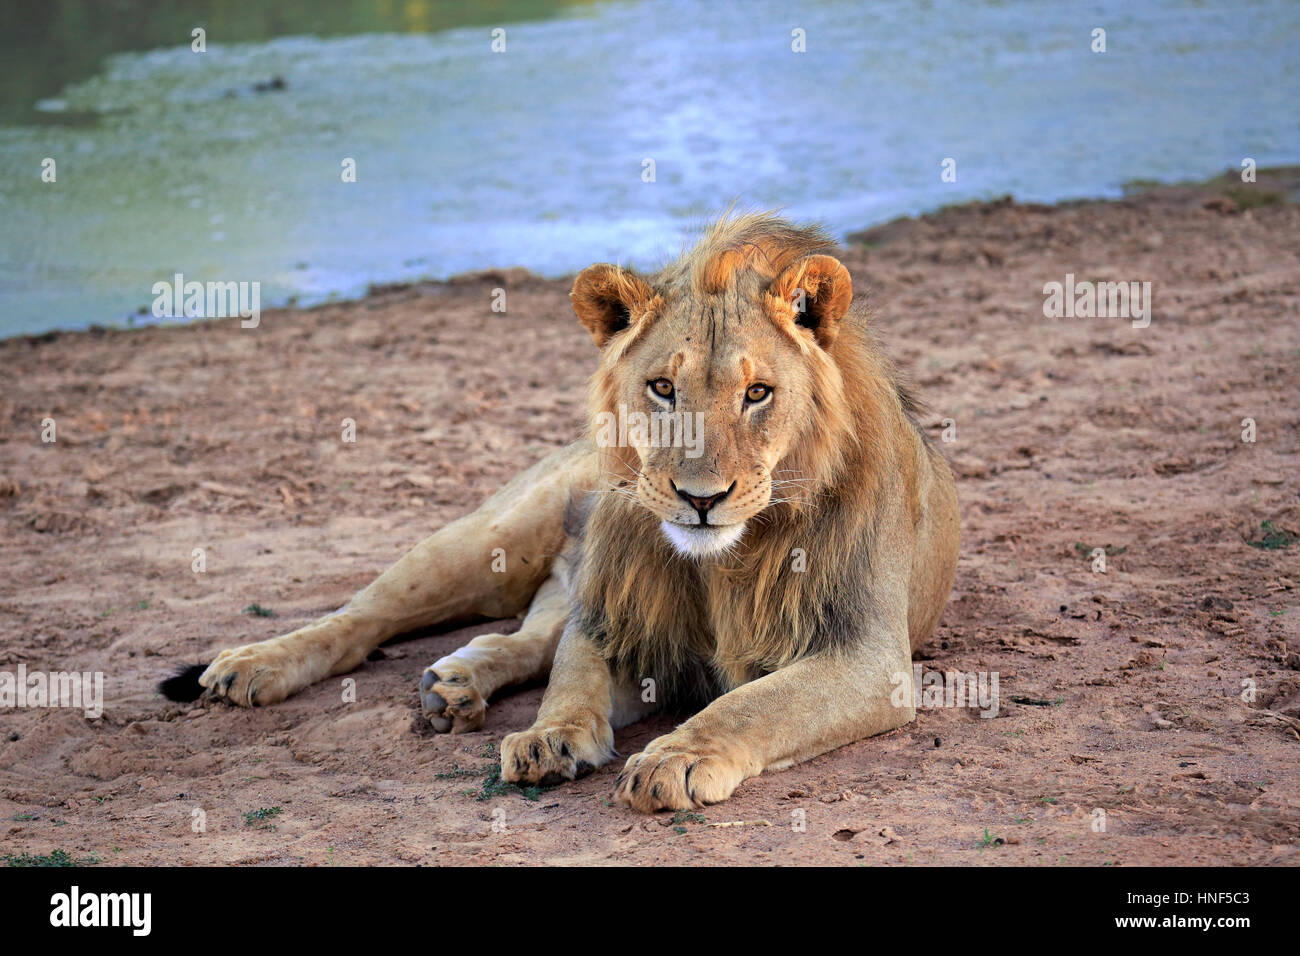 Lion, (Panthera leo), male five years old resting at water, Tswalu Game Reserve, Kalahari, Northern Cape, South Africa, Africa Stock Photo